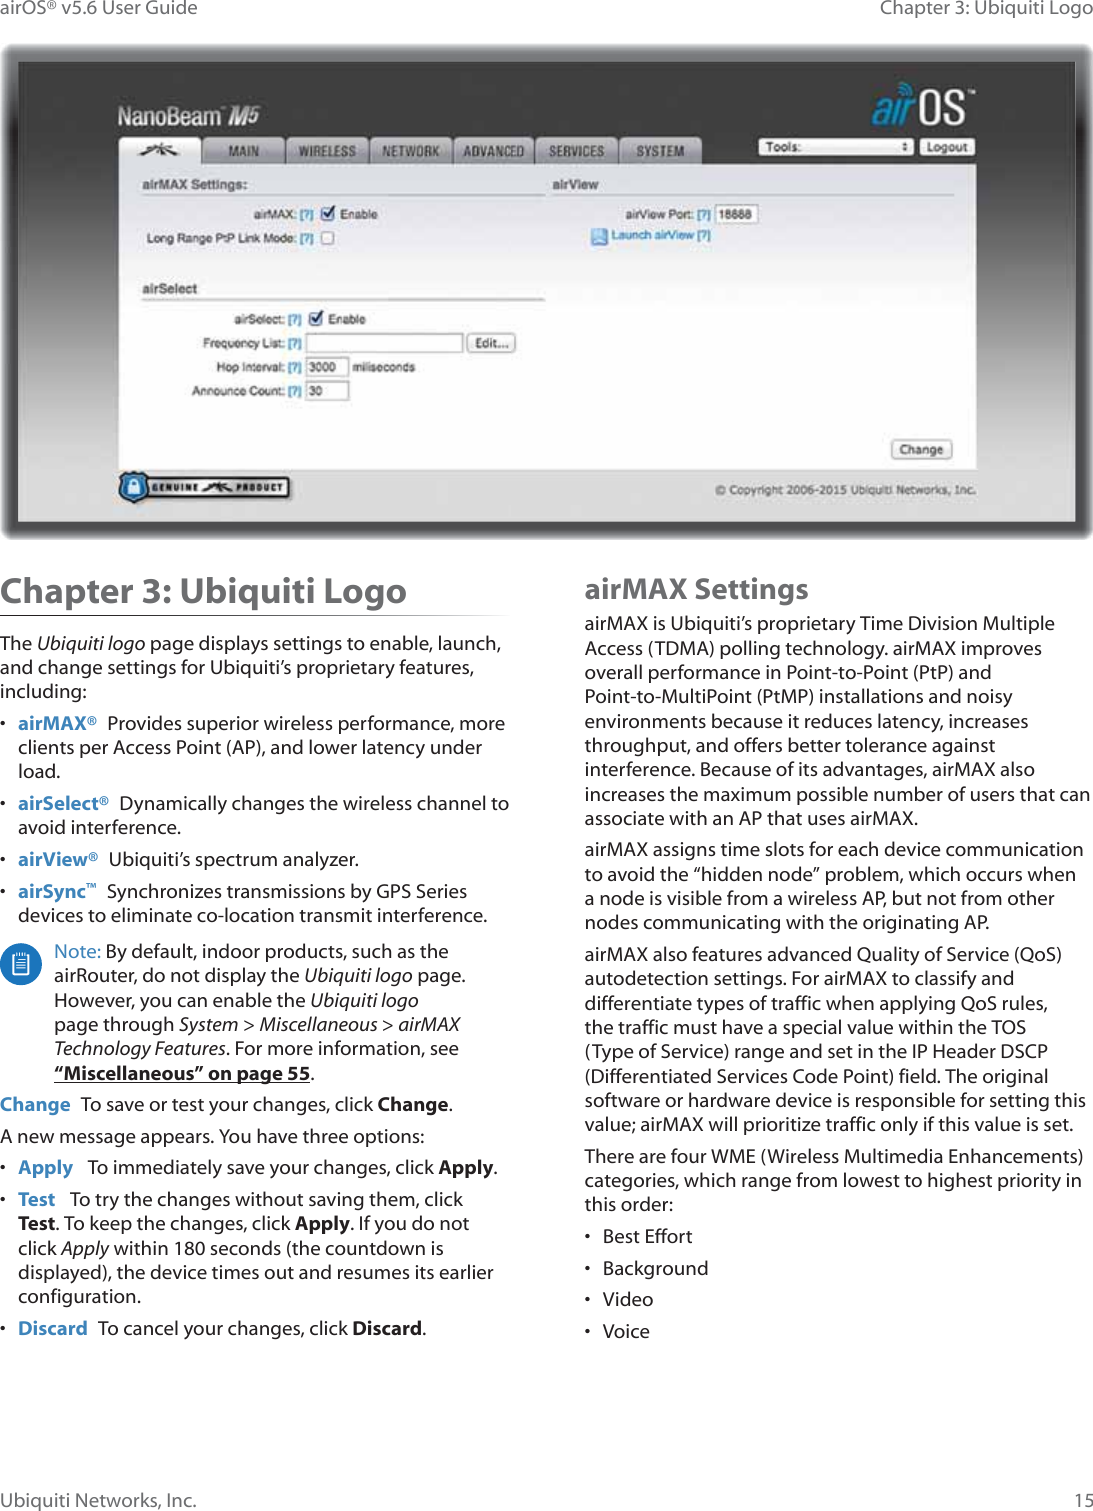 15Chapter 3: Ubiquiti LogoairOS® v5.6 User GuideUbiquiti Networks, Inc.Chapter 3: Ubiquiti LogoThe Ubiquiti logo page displays settings to enable, launch, and change settings for Ubiquiti’s proprietary features, including:•  airMAX®  Provides superior wireless performance, more clients per Access Point (AP), and lower latency under load.•  airSelect®  Dynamically changes the wireless channel to avoid interference.•  airView®  Ubiquiti’s spectrum analyzer.•  airSync™ Synchronizes transmissions by GPS Series devices to eliminate co-location transmit interference.Note: By default, indoor products, such as the airRouter, do not display the Ubiquiti logo page. However, you can enable the Ubiquiti logo page through System &gt; Miscellaneous &gt; airMAX Technology Features. For more information, see “Miscellaneous” on page 55.Change  To save or test your changes, click Change.A new message appears. You have three options:•  Apply   To immediately save your changes, click Apply.•  Test   To try the changes without saving them, click Test. To keep the changes, click Apply. If you do not click Apply within 180 seconds (the countdown is displayed), the device times out and resumes its earlier configuration.•  Discard  To cancel your changes, click Discard.airMAX SettingsairMAX is Ubiquiti’s proprietary Time Division Multiple Access (TDMA) polling technology. airMAX improves overall performance in Point-to-Point (PtP) and Point-to-MultiPoint (PtMP) installations and noisy environments because it reduces latency, increases throughput, and offers better tolerance against interference. Because of its advantages, airMAX also increases the maximum possible number of users that can associate with an AP that uses airMAX. airMAX assigns time slots for each device communication to avoid the “hidden node” problem, which occurs when a node is visible from a wireless AP, but not from other nodes communicating with the originating AP.airMAX also features advanced Quality of Service (QoS) autodetection settings. For airMAX to classify and differentiate types of traffic when applying QoS rules, the traffic must have a special value within the TOS (Type of Service) range and set in the IP Header DSCP (Differentiated Services Code Point) field. The original software or hardware device is responsible for setting this value; airMAX will prioritize traffic only if this value is set.There are four WME (Wireless Multimedia Enhancements) categories, which range from lowest to highest priority in this order:• Best Effort• Background• Video• Voice